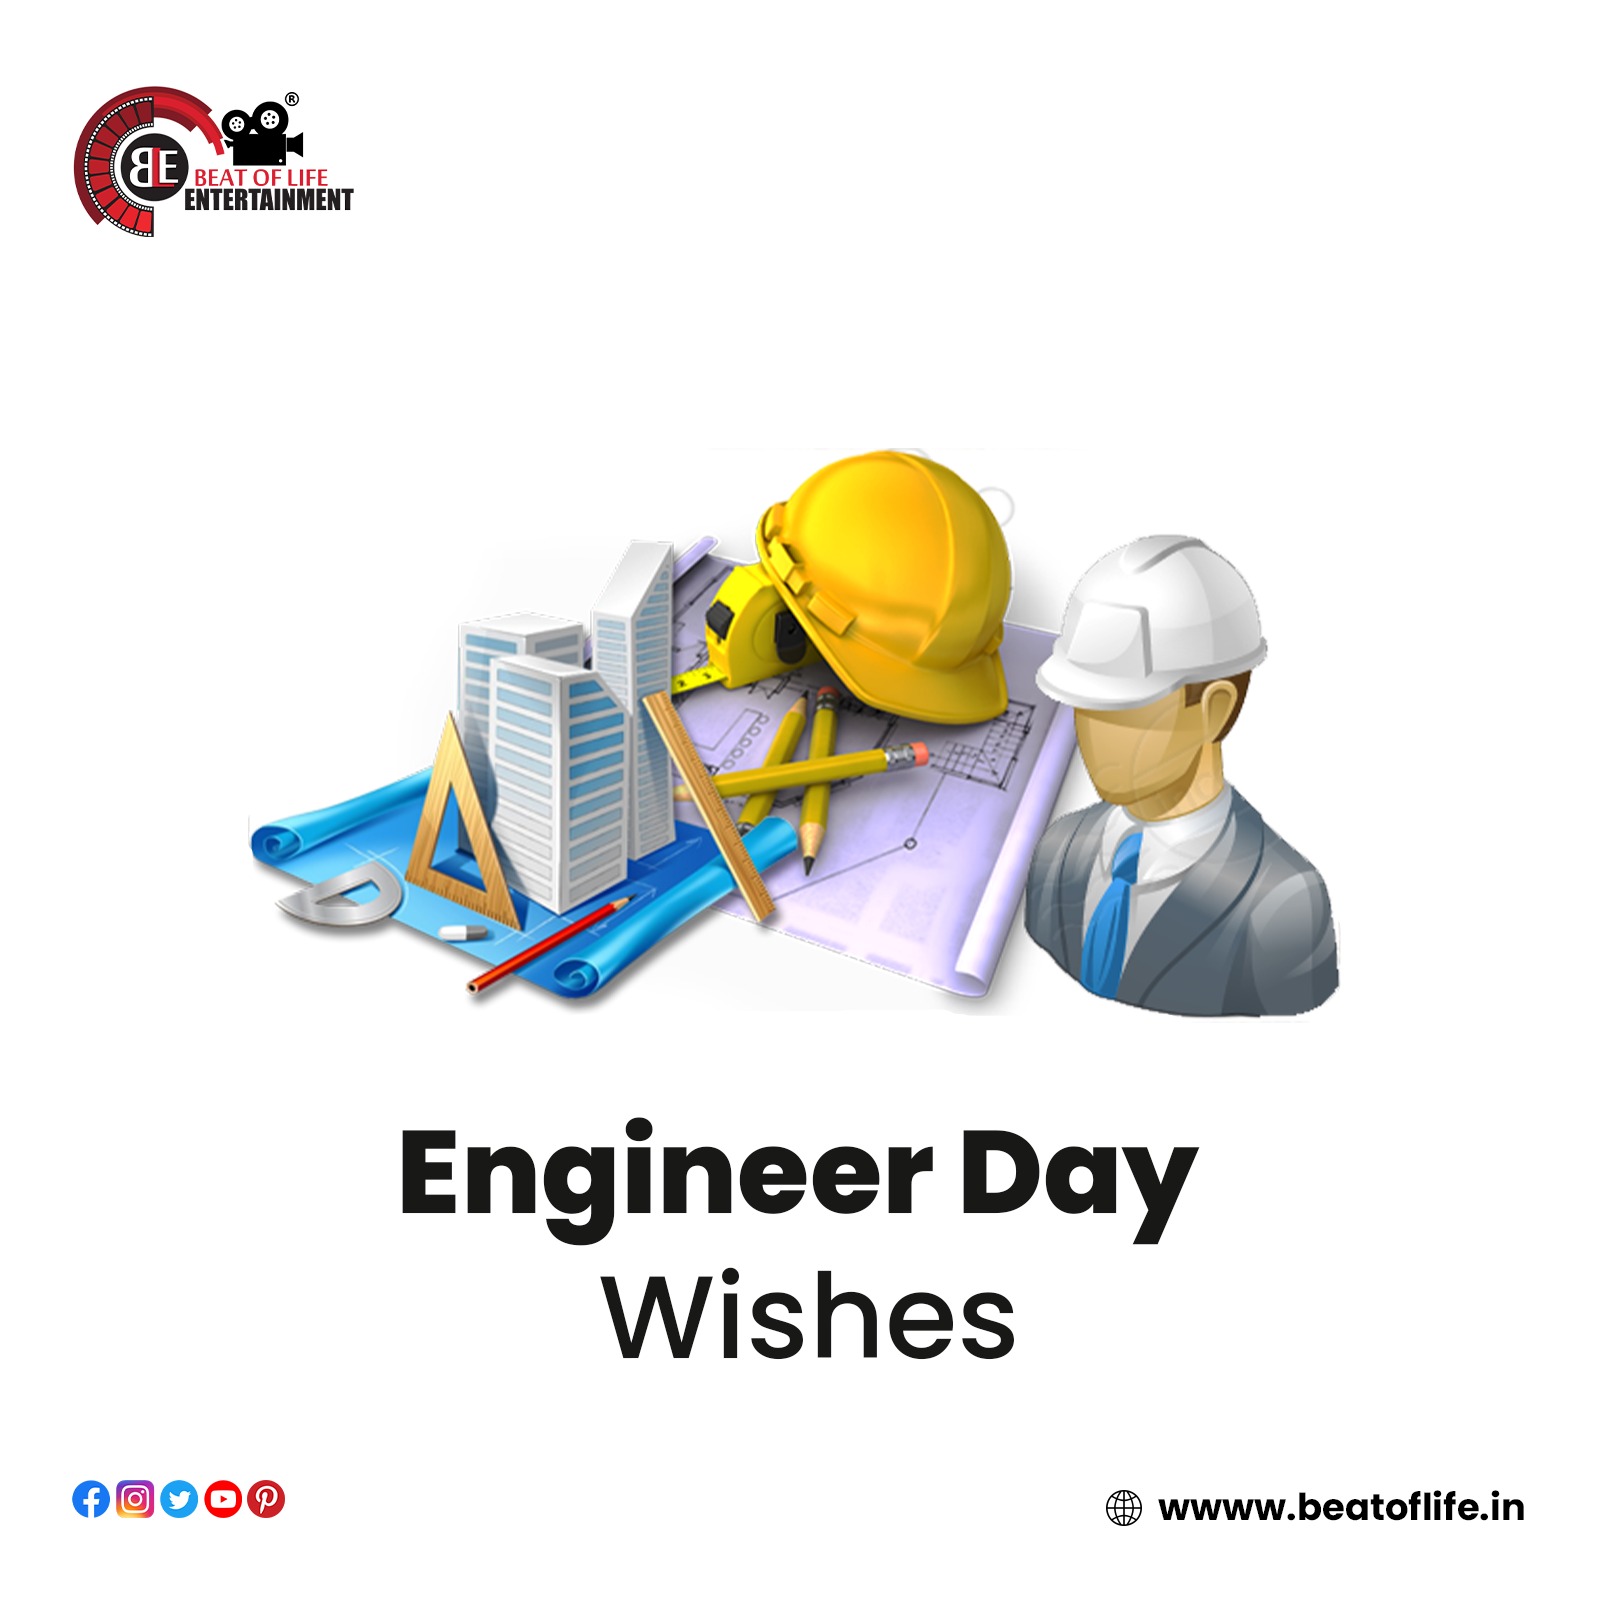 Engineer's Day Wishes